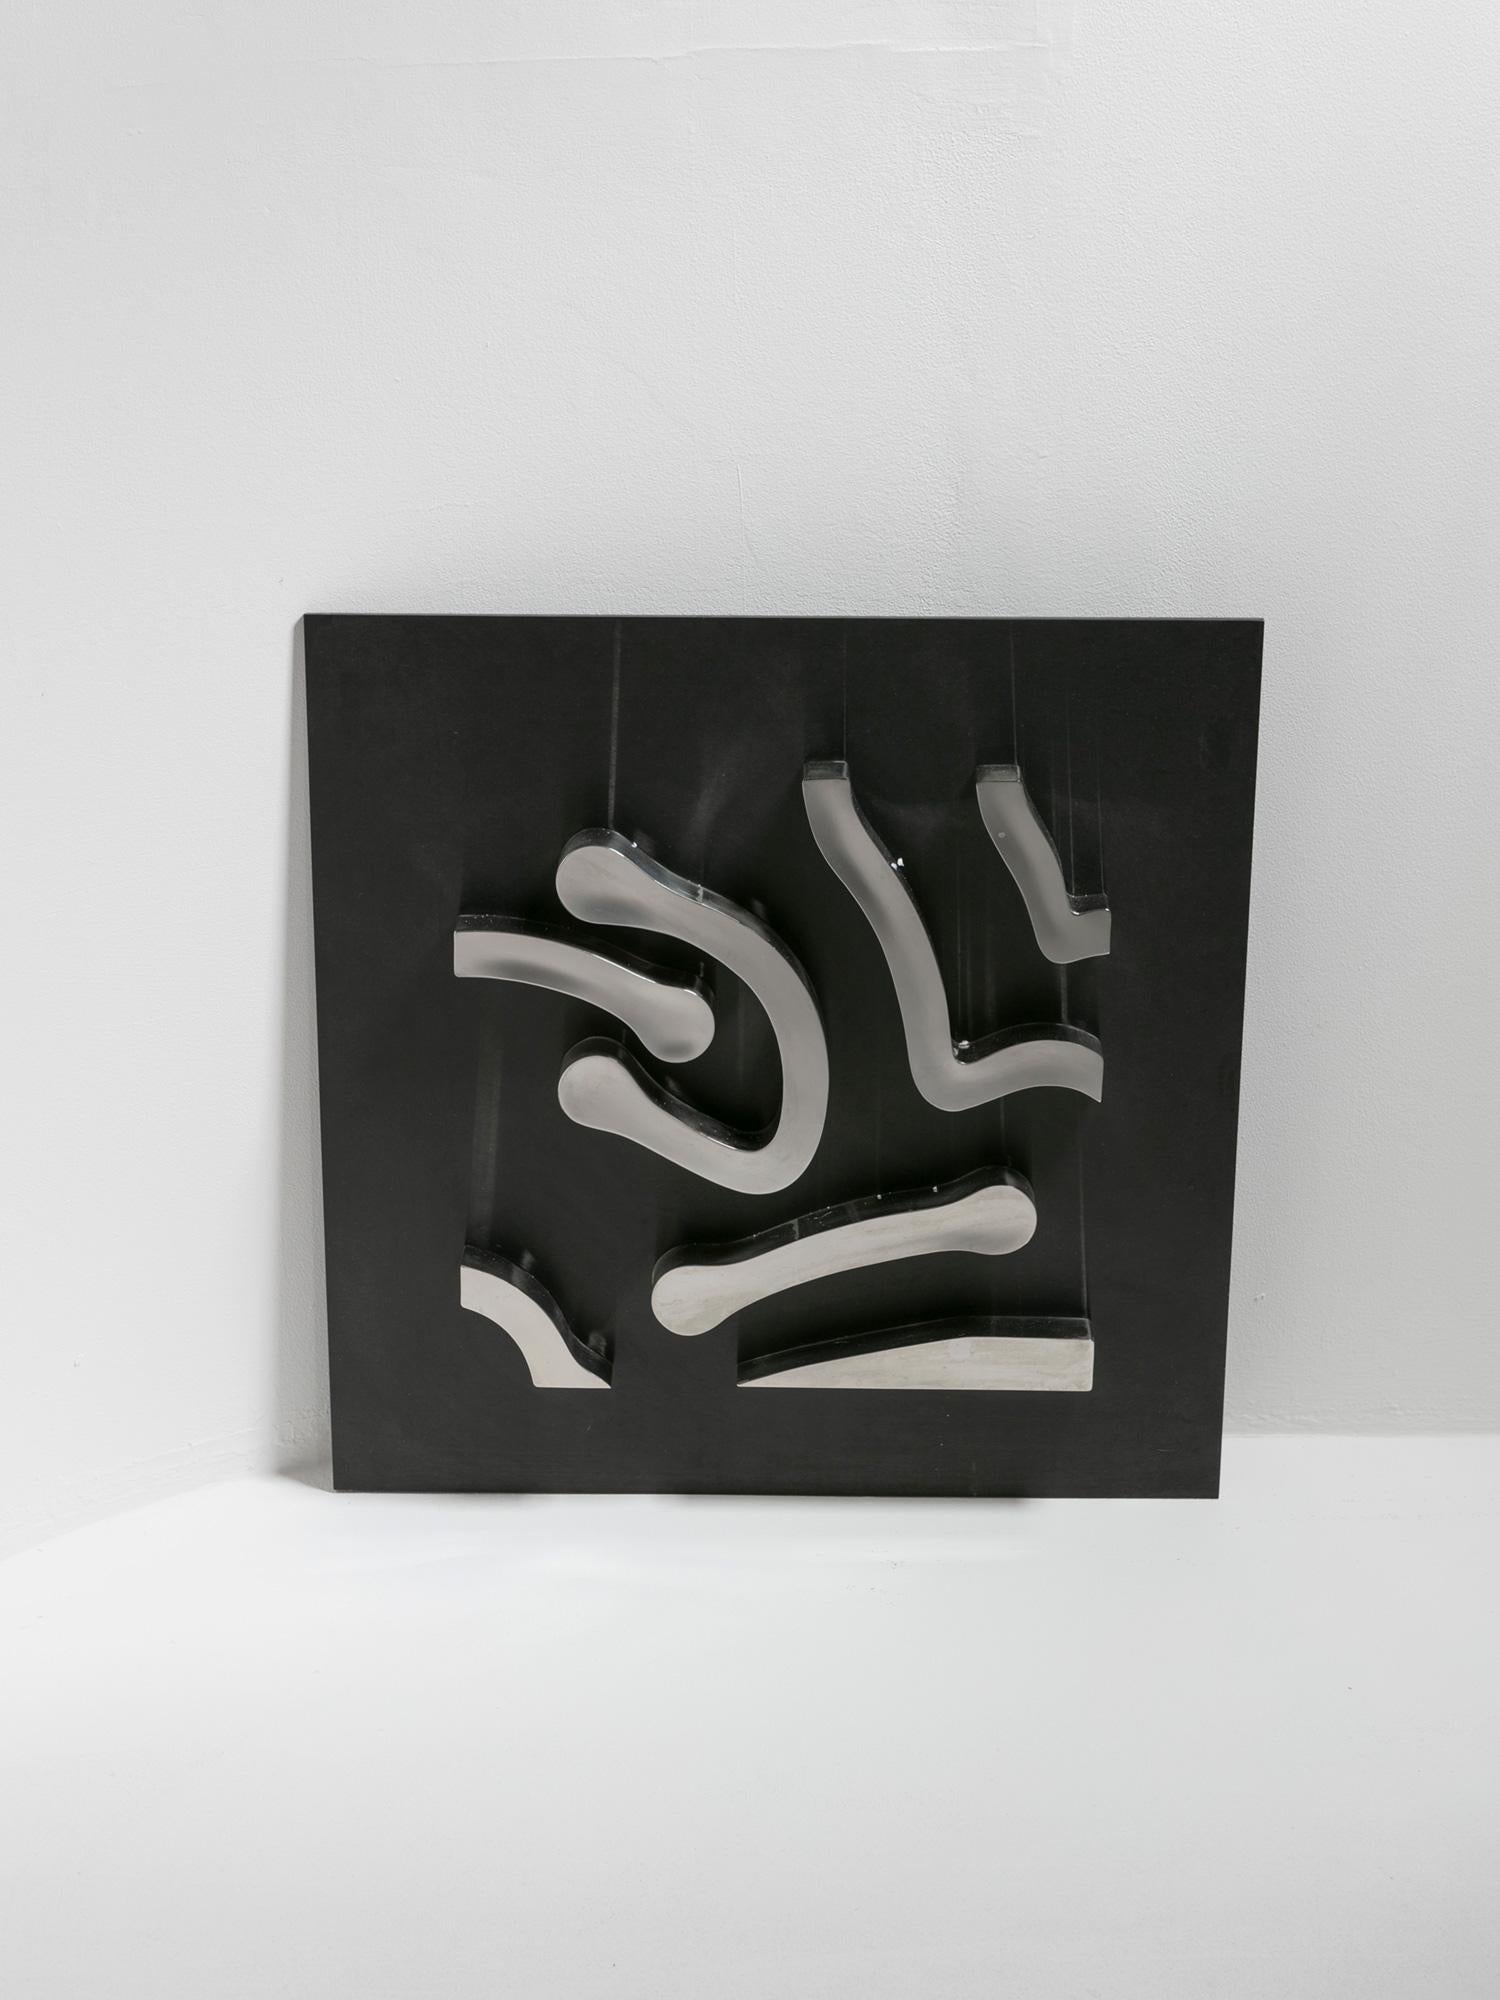 Steel artwork by Duccio Berti.
Abstract wall sculpture composed by stainless steel elements creating labyrinthine paths.
Signed and dated on verso.